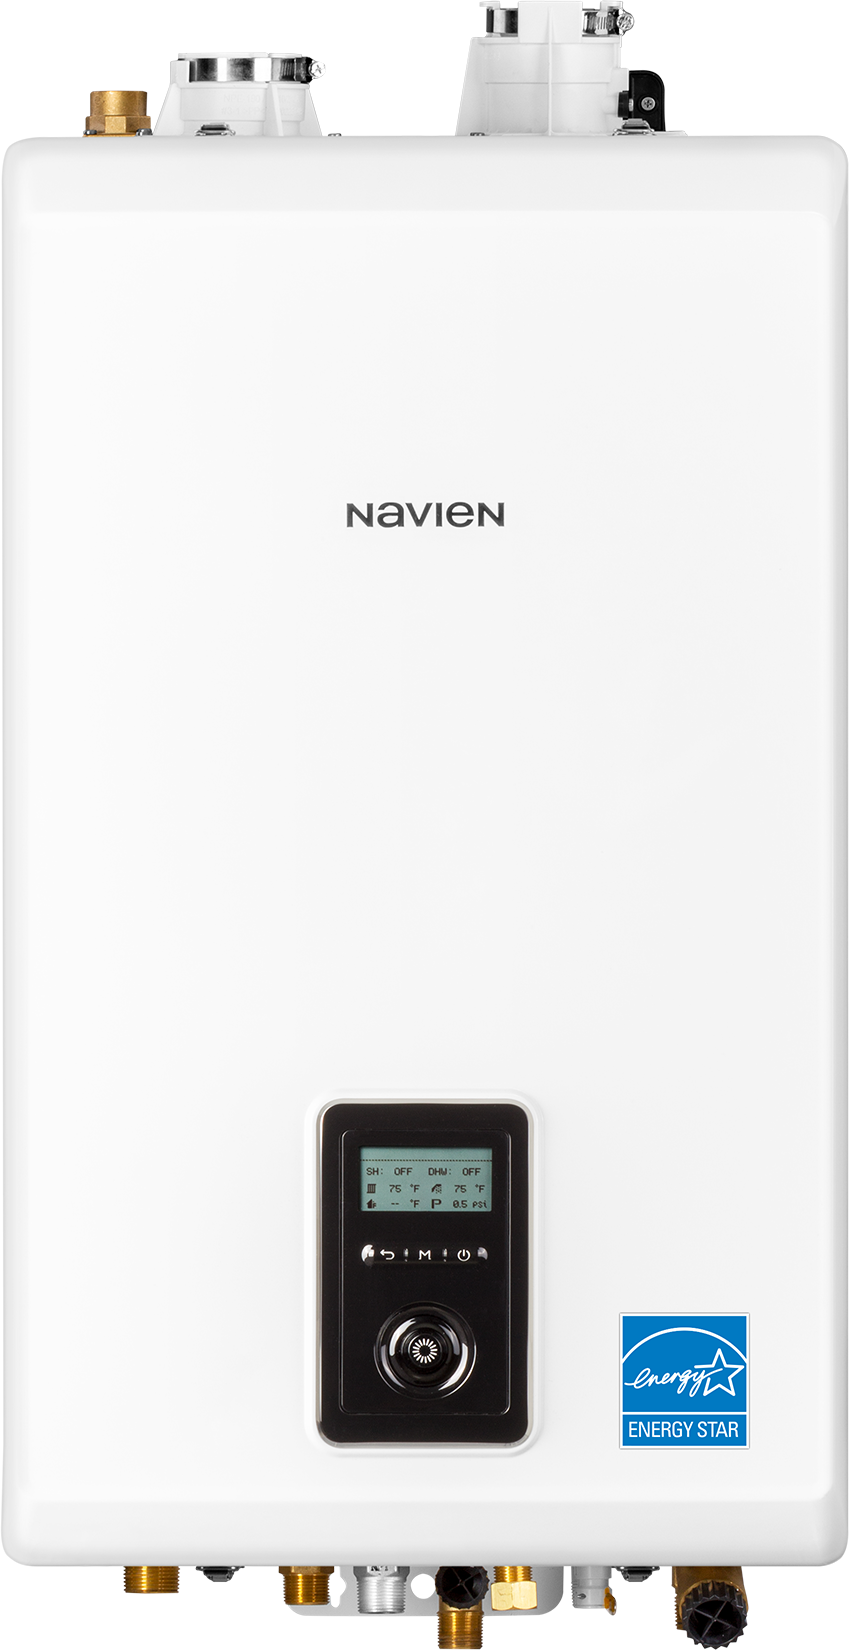 Navien's Water Heater with a logo of ao smith